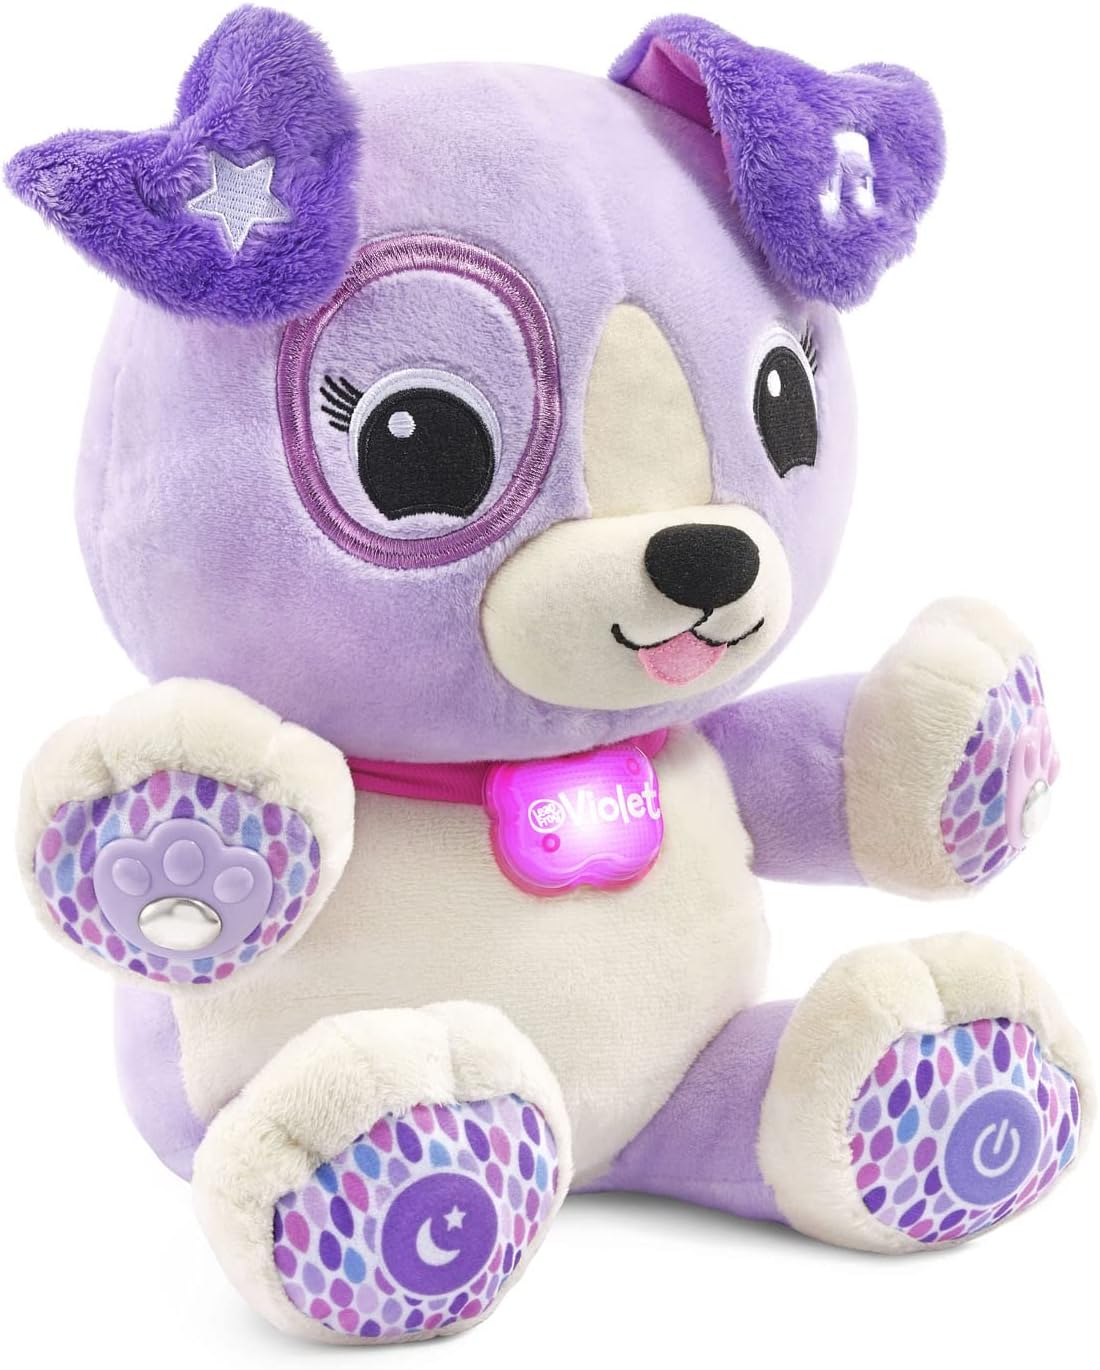 LeapFrog My Pal Violet Personalized Plush Puppy - image 4 of 5